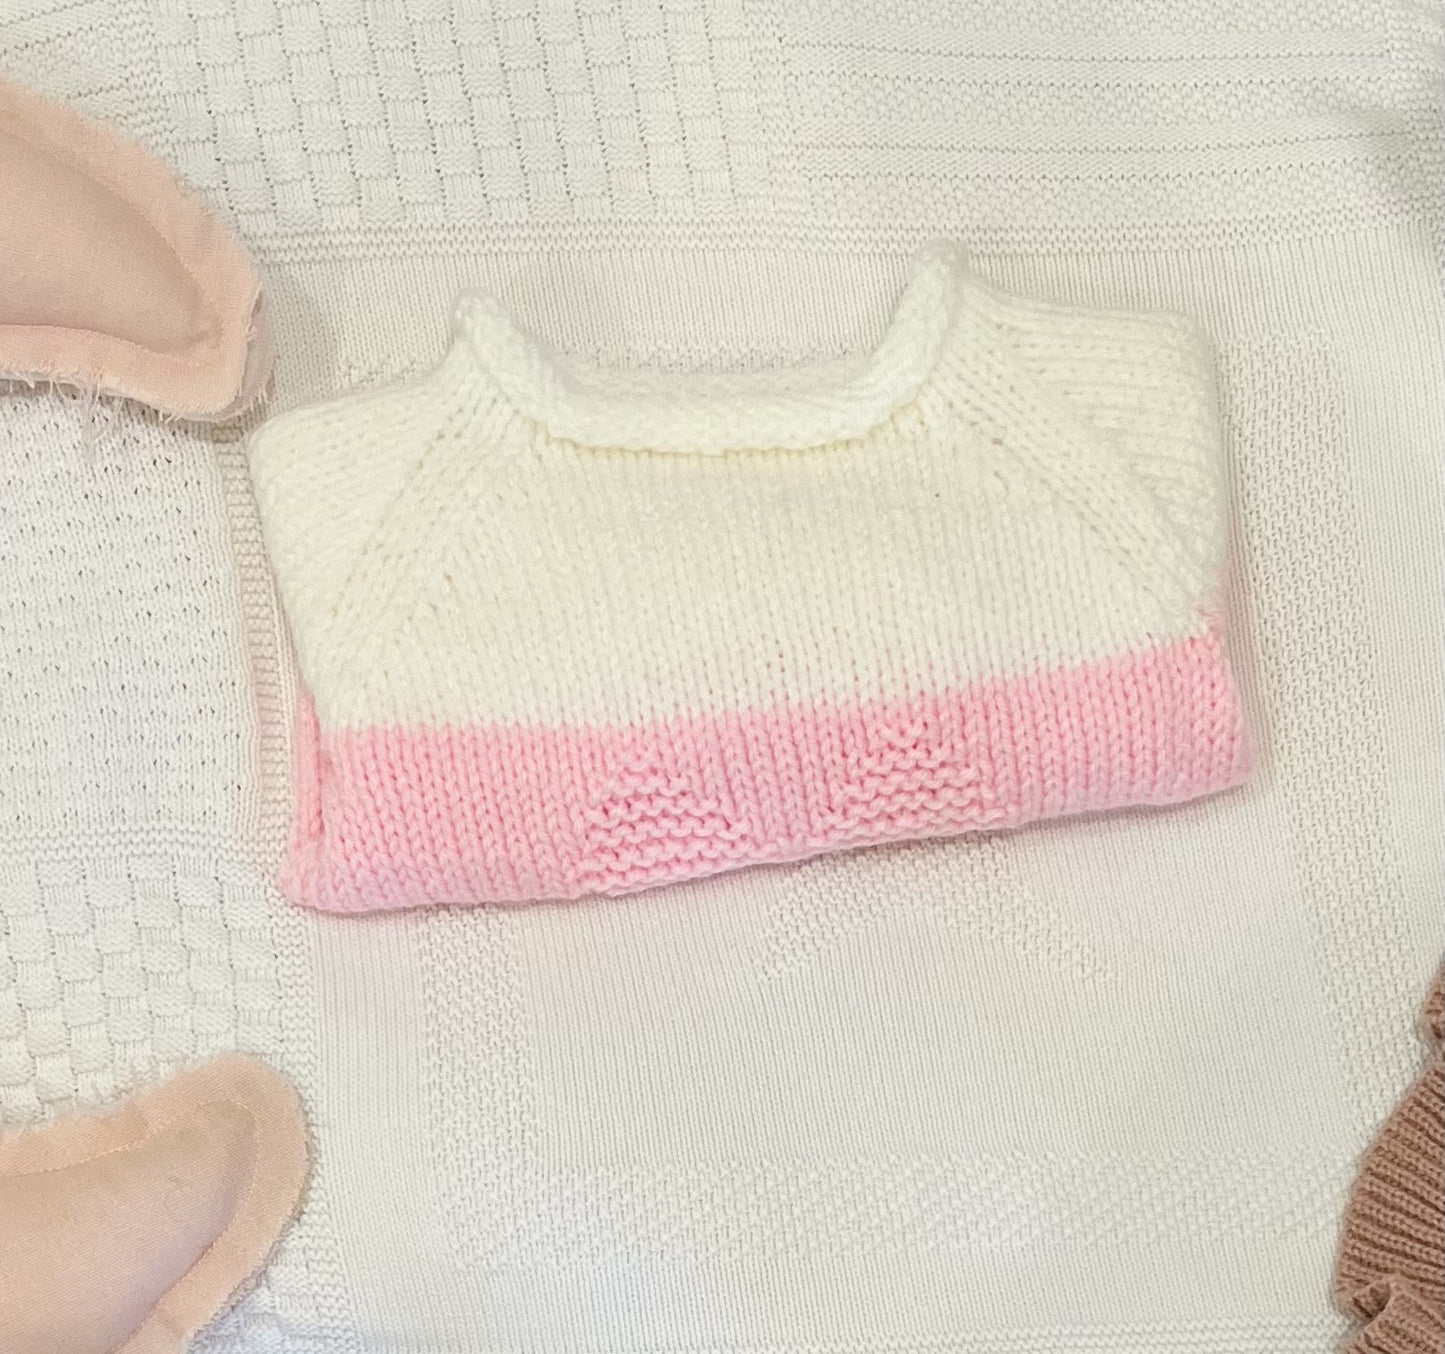 HAND KNITTED JUMPER - PINK AND WHITE